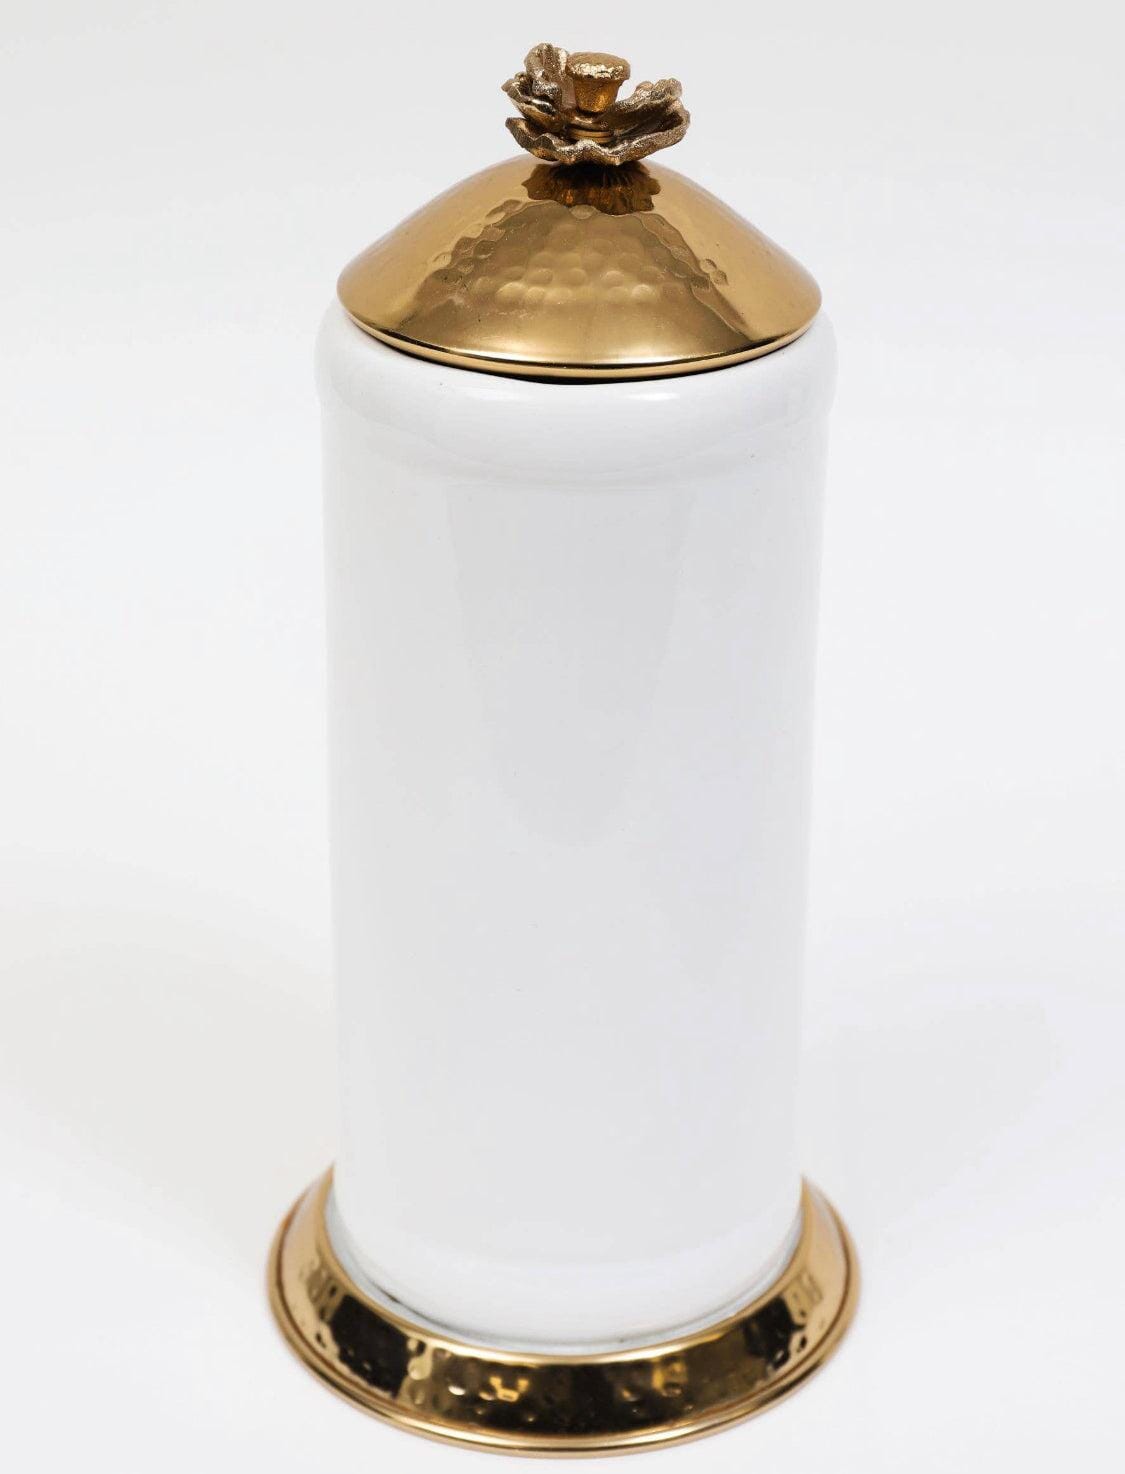 White Glass Canister Gold Hammered Lid and Base Flower knob Canisters High Class Touch - Home Decor Large 